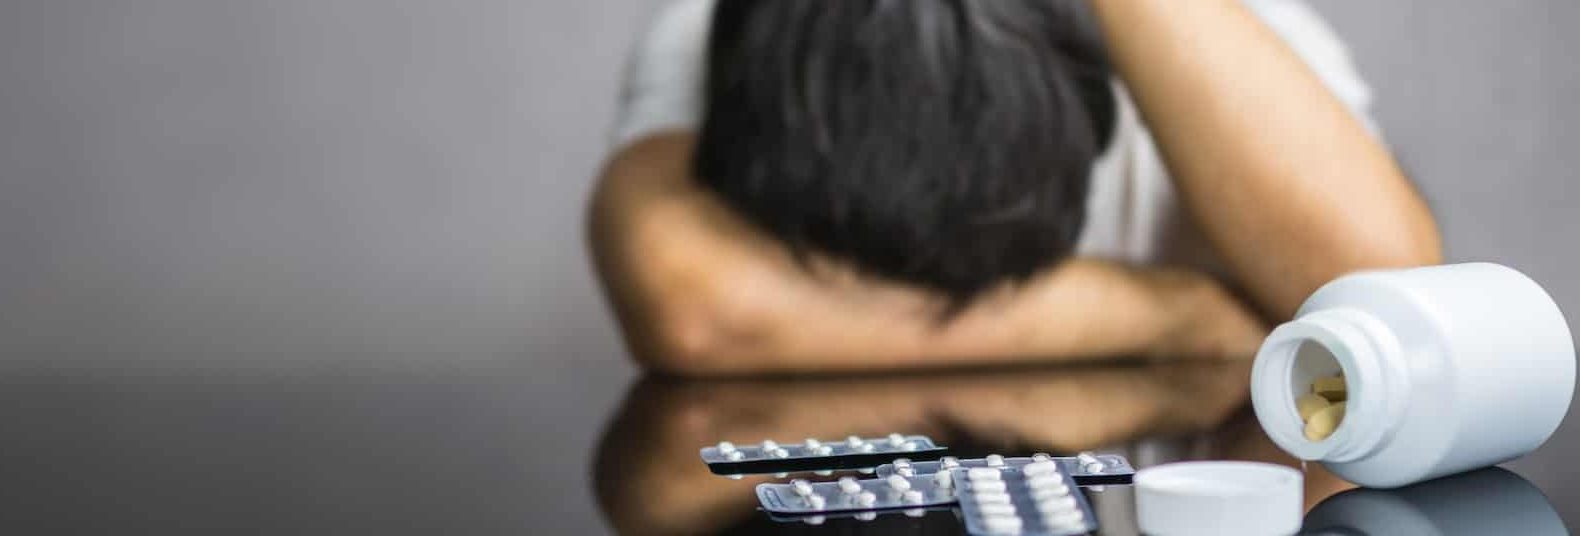 Xanax Overdose: Signs of Abuse, Withdrawal Symptoms, and How to Detox